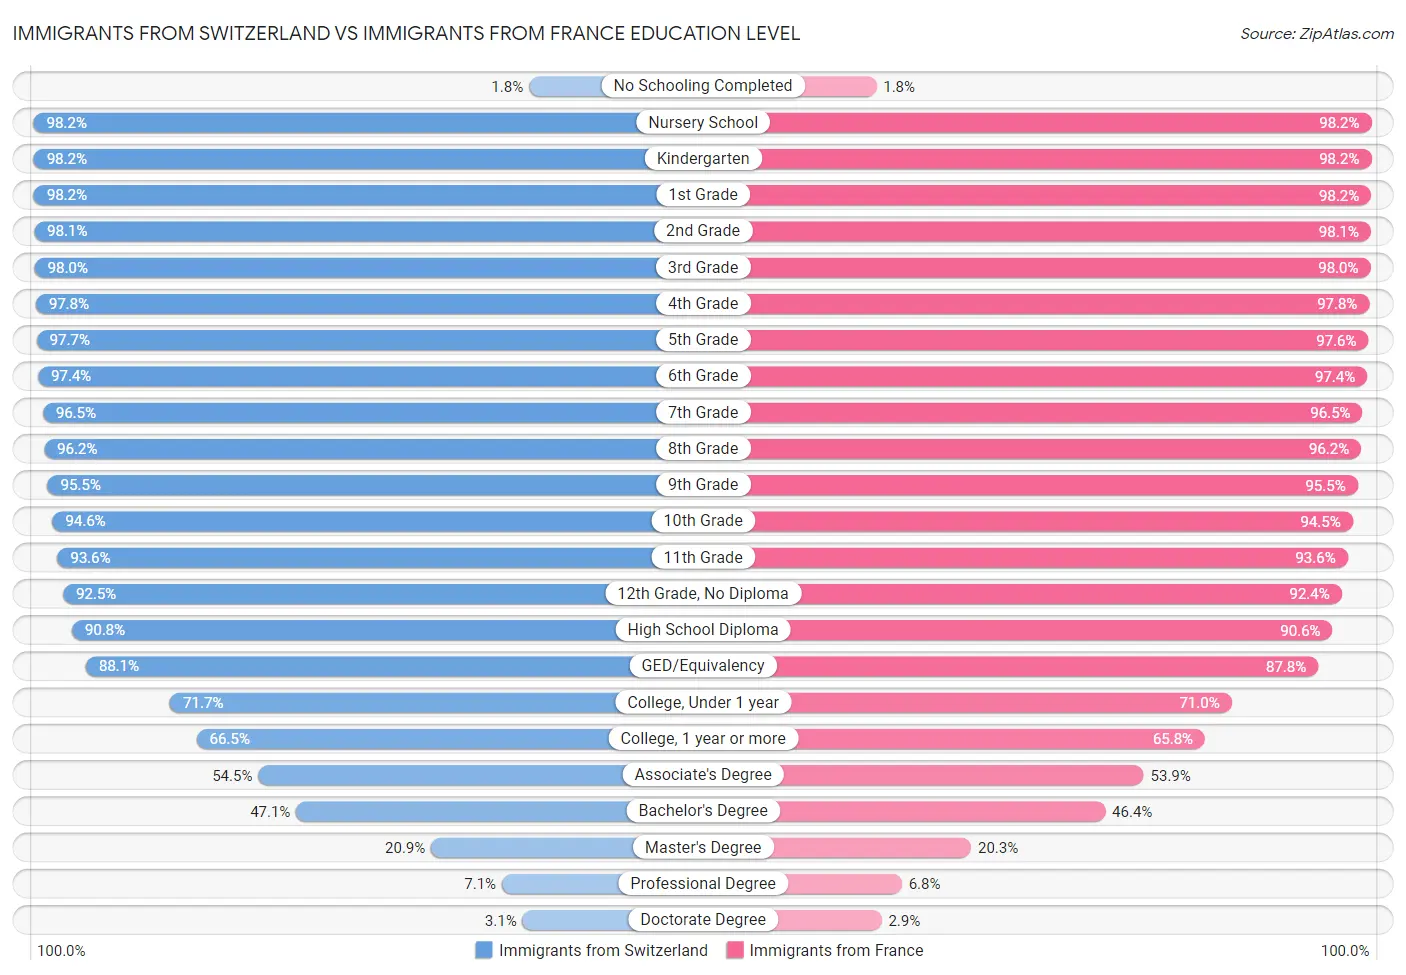 Immigrants from Switzerland vs Immigrants from France Education Level